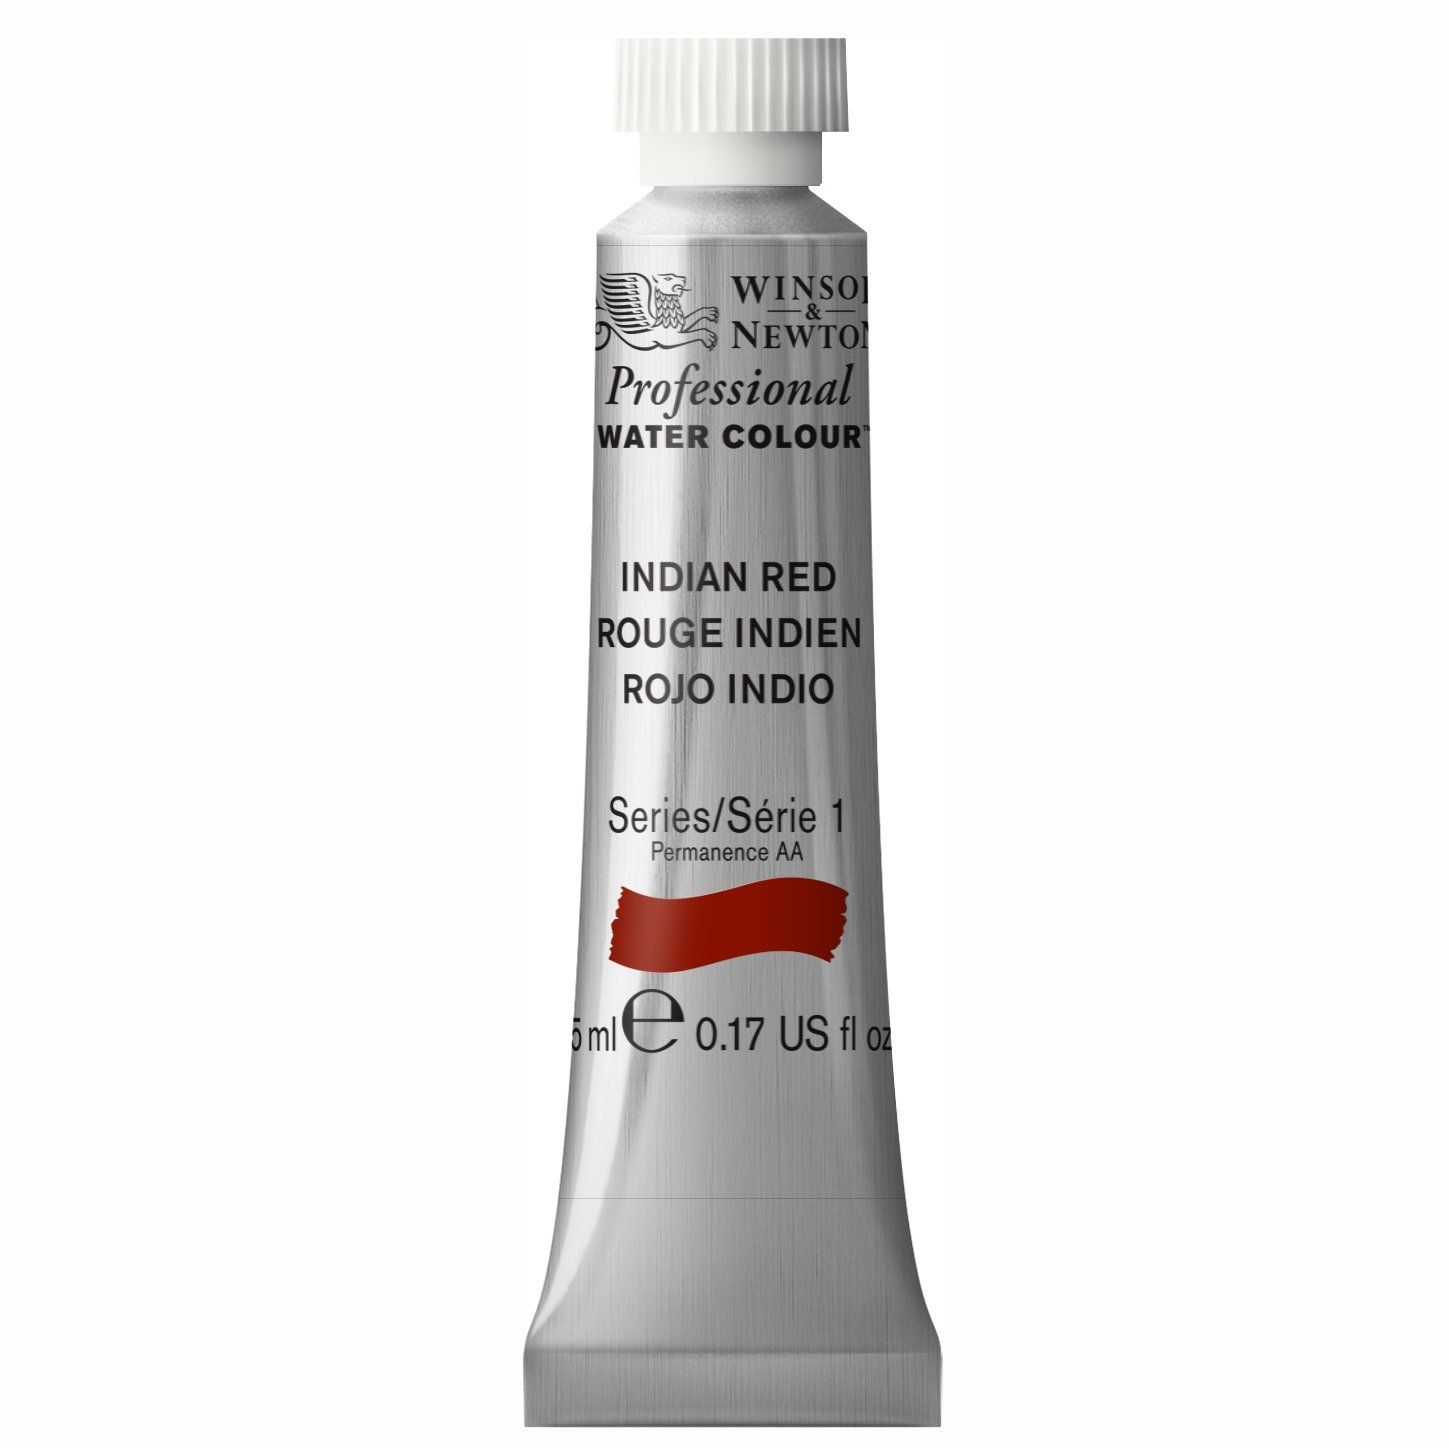 Winsor & Newton Watercolour Paint - Indian Red 5ml